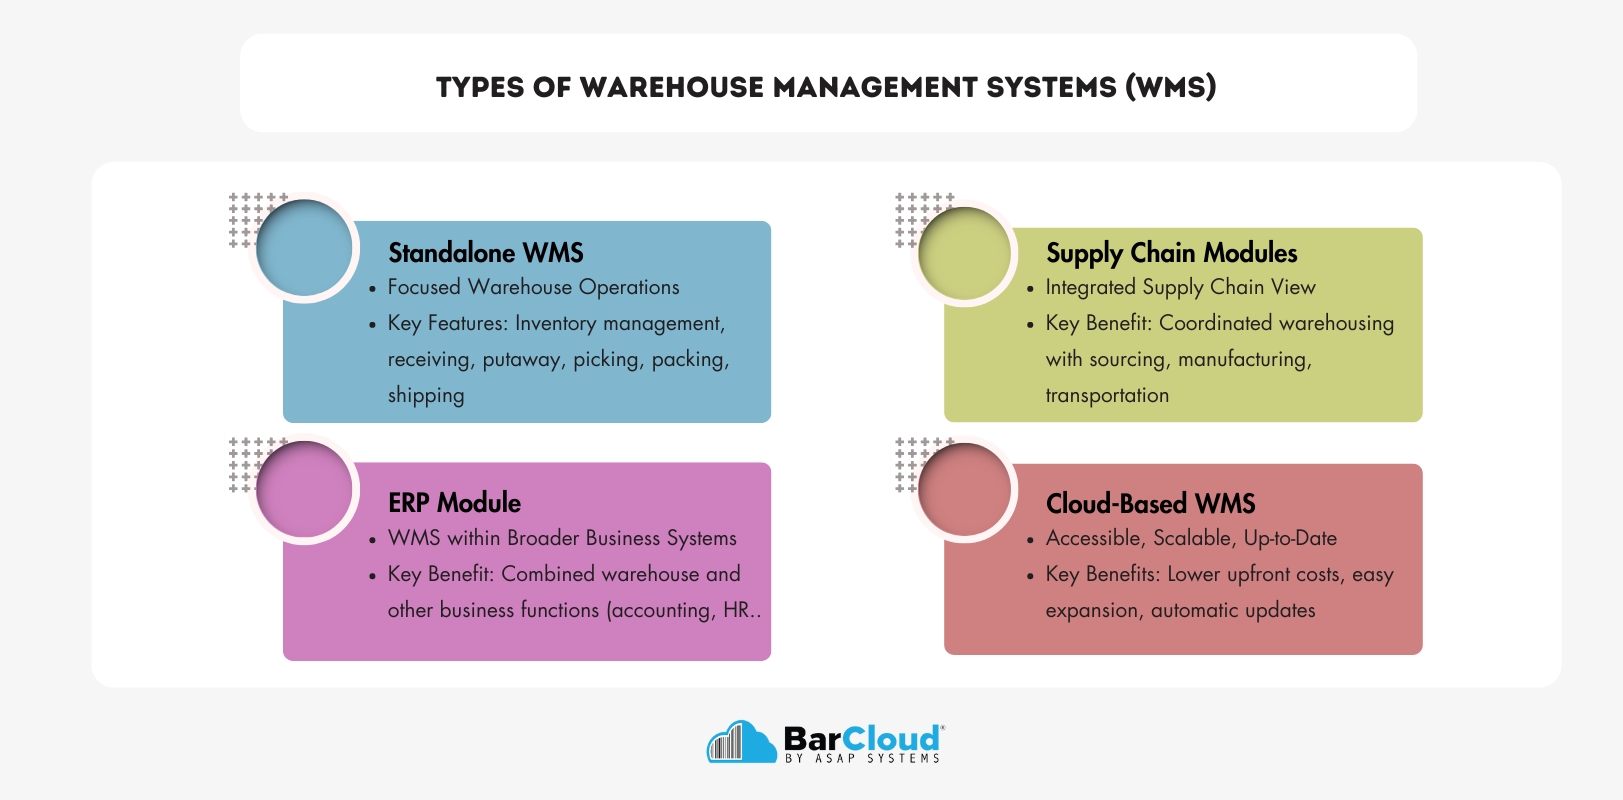 Types of Warehouse Management Systems (WMS)